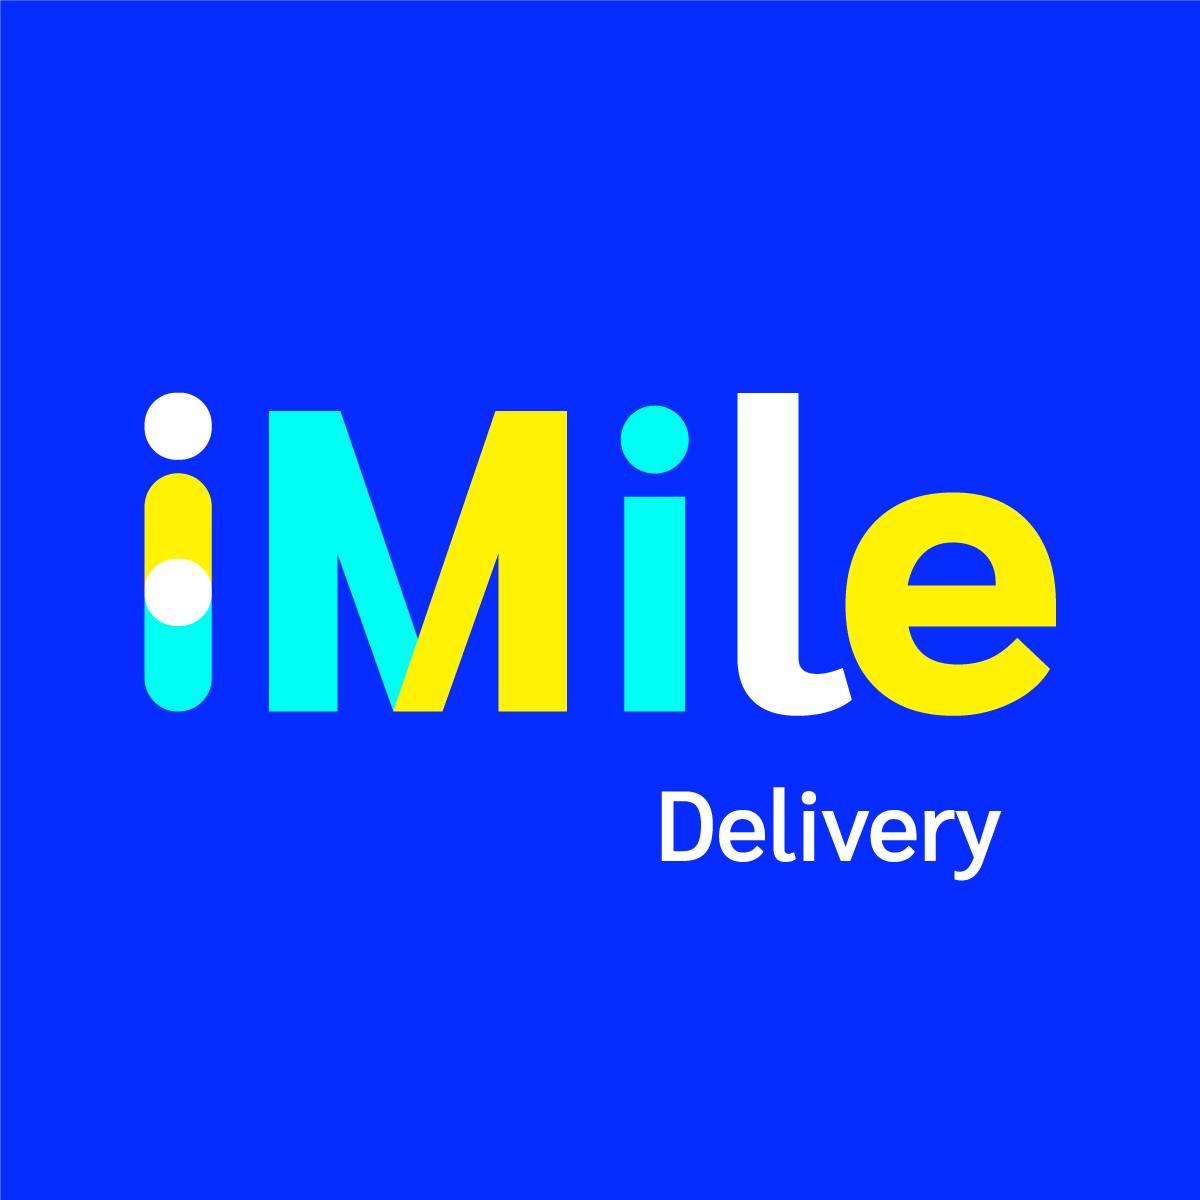 imile delivery : App, Order Tracking, Contact Info - All at Your Fingertips!